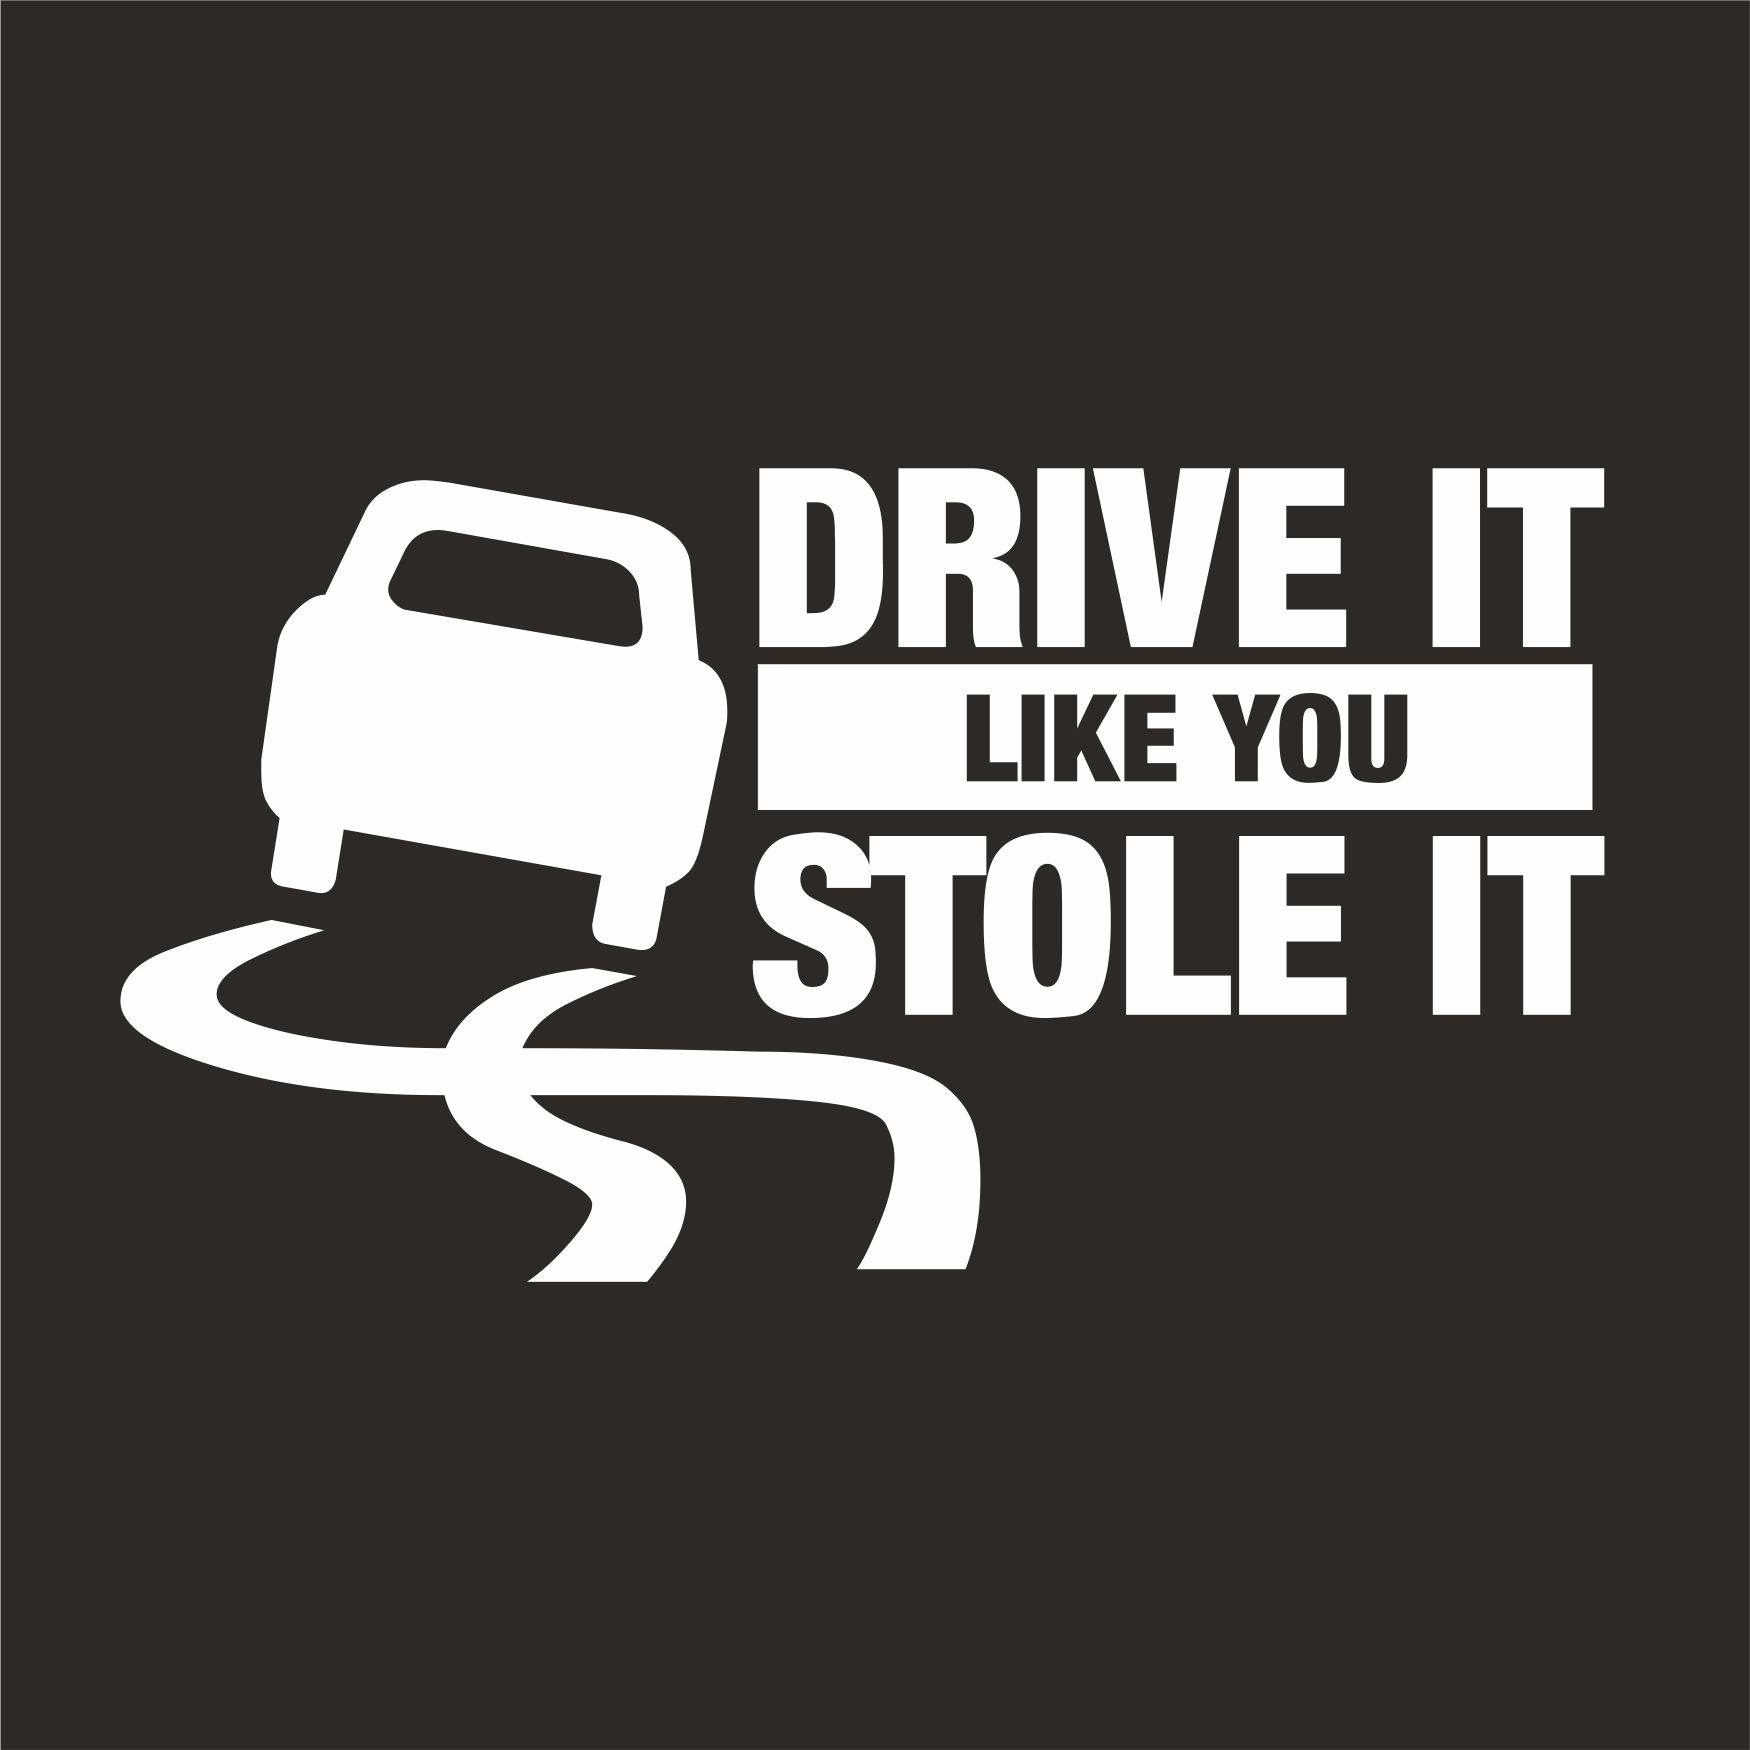 Do you like drive. Drive it. Isteal.it. The stole it. Driver it like you Park it.